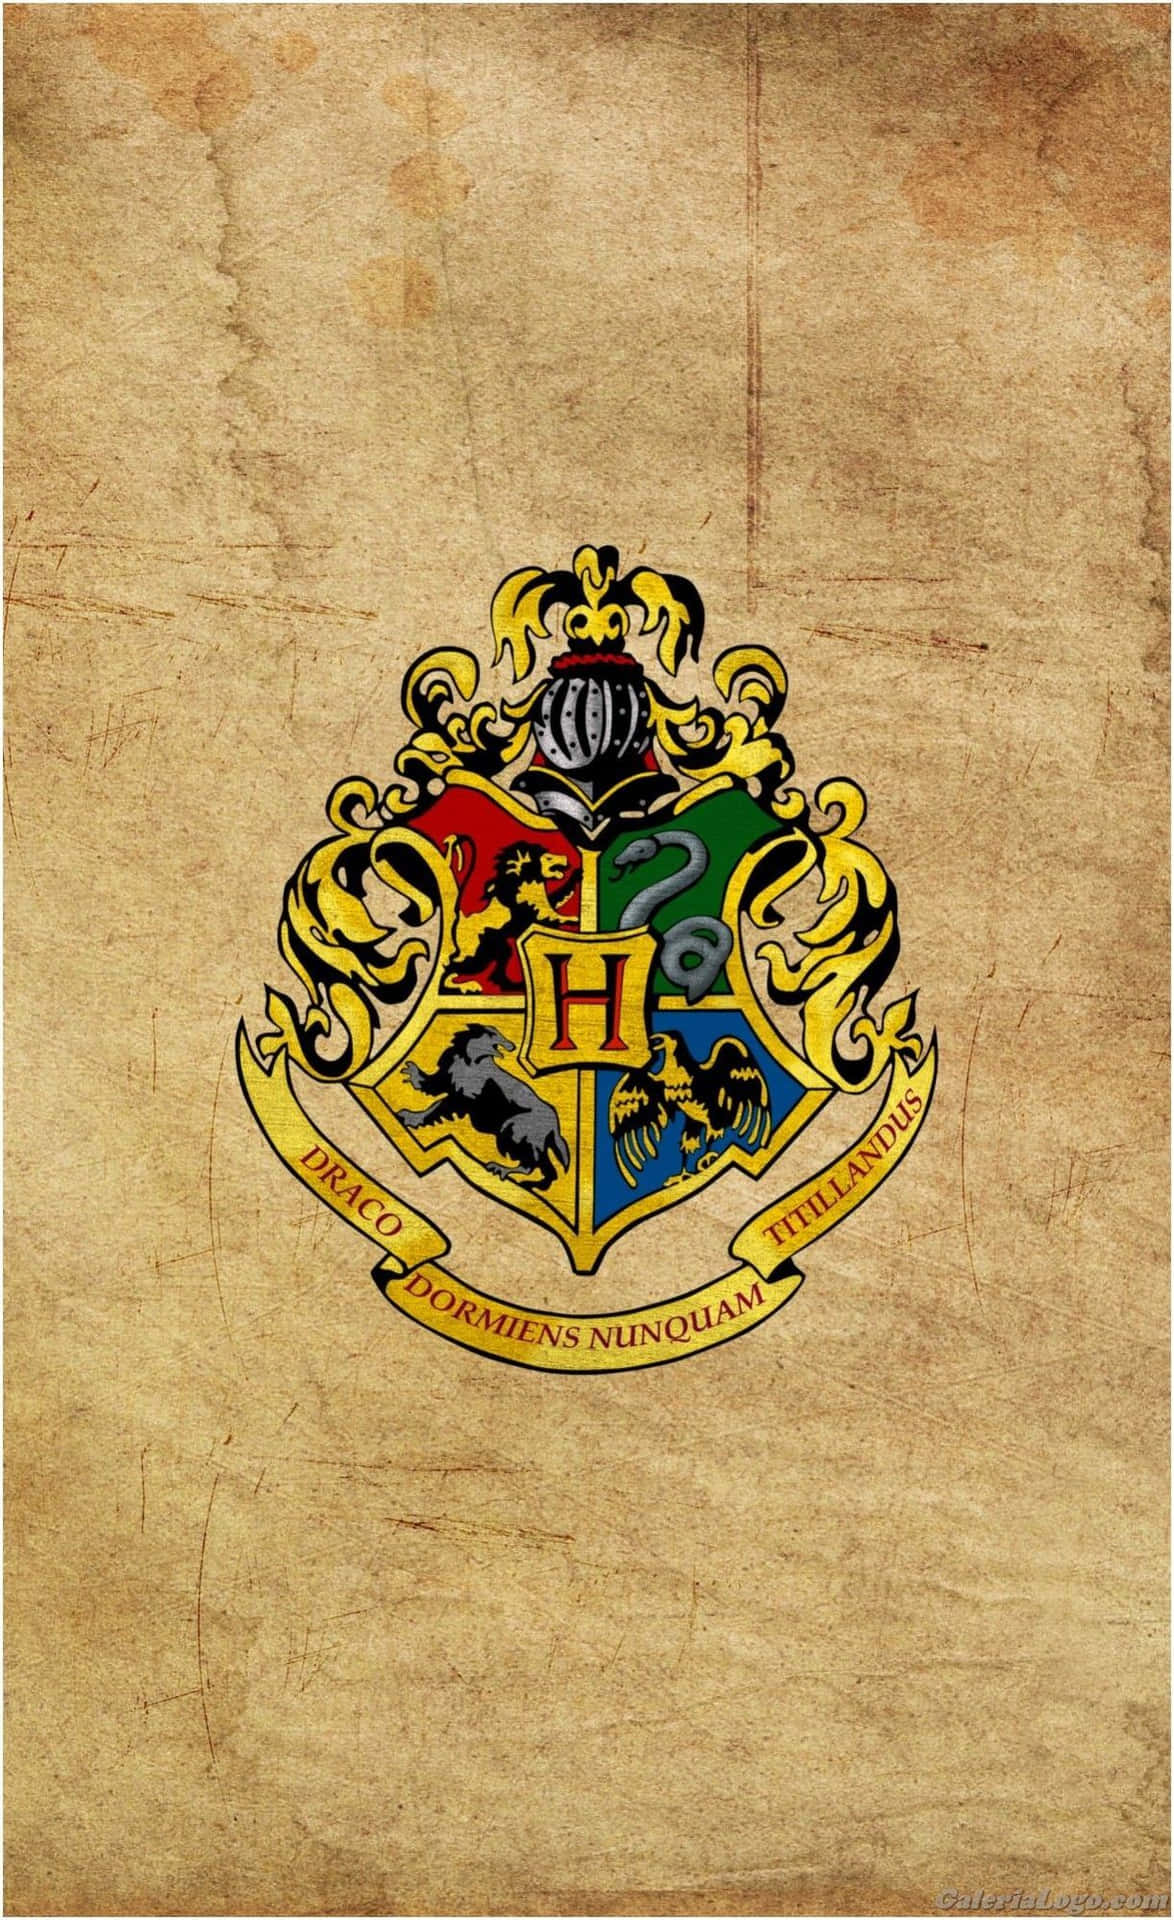 Caption: Hogwarts School of Witchcraft and Wizardry Crest Wallpaper